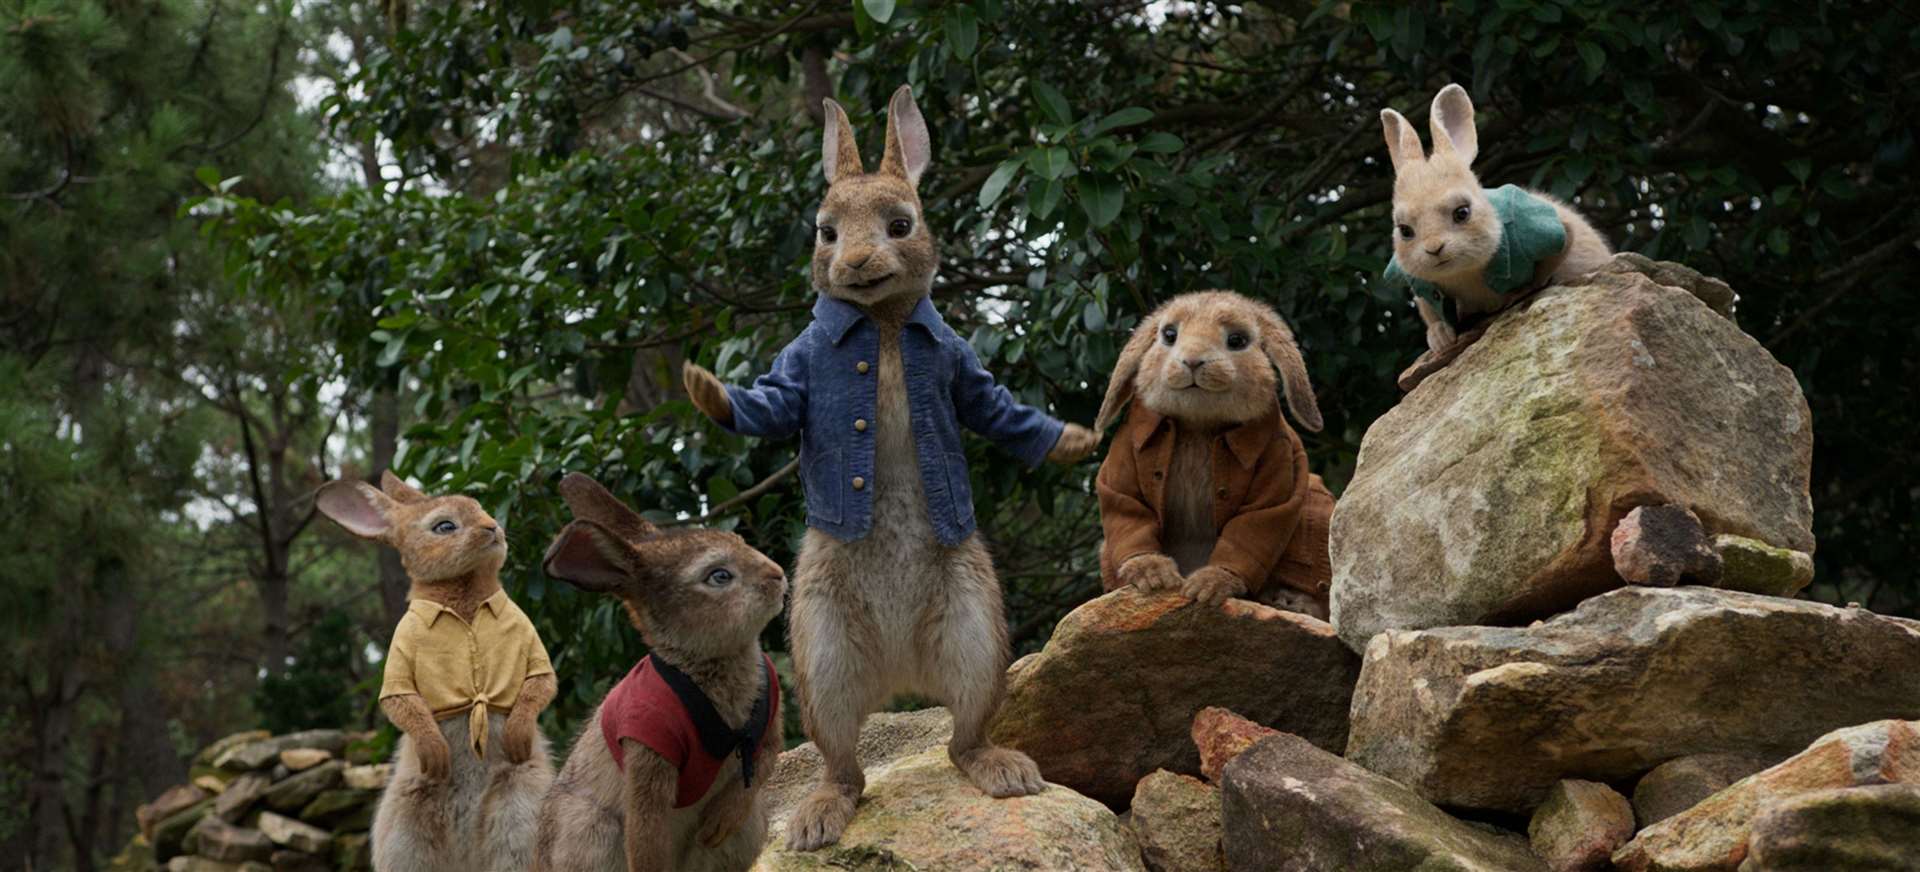 The sequel to Peter Rabbit is the first blockbuster to welcome back fans Picture: CTMG, Inc./Sony Pictures